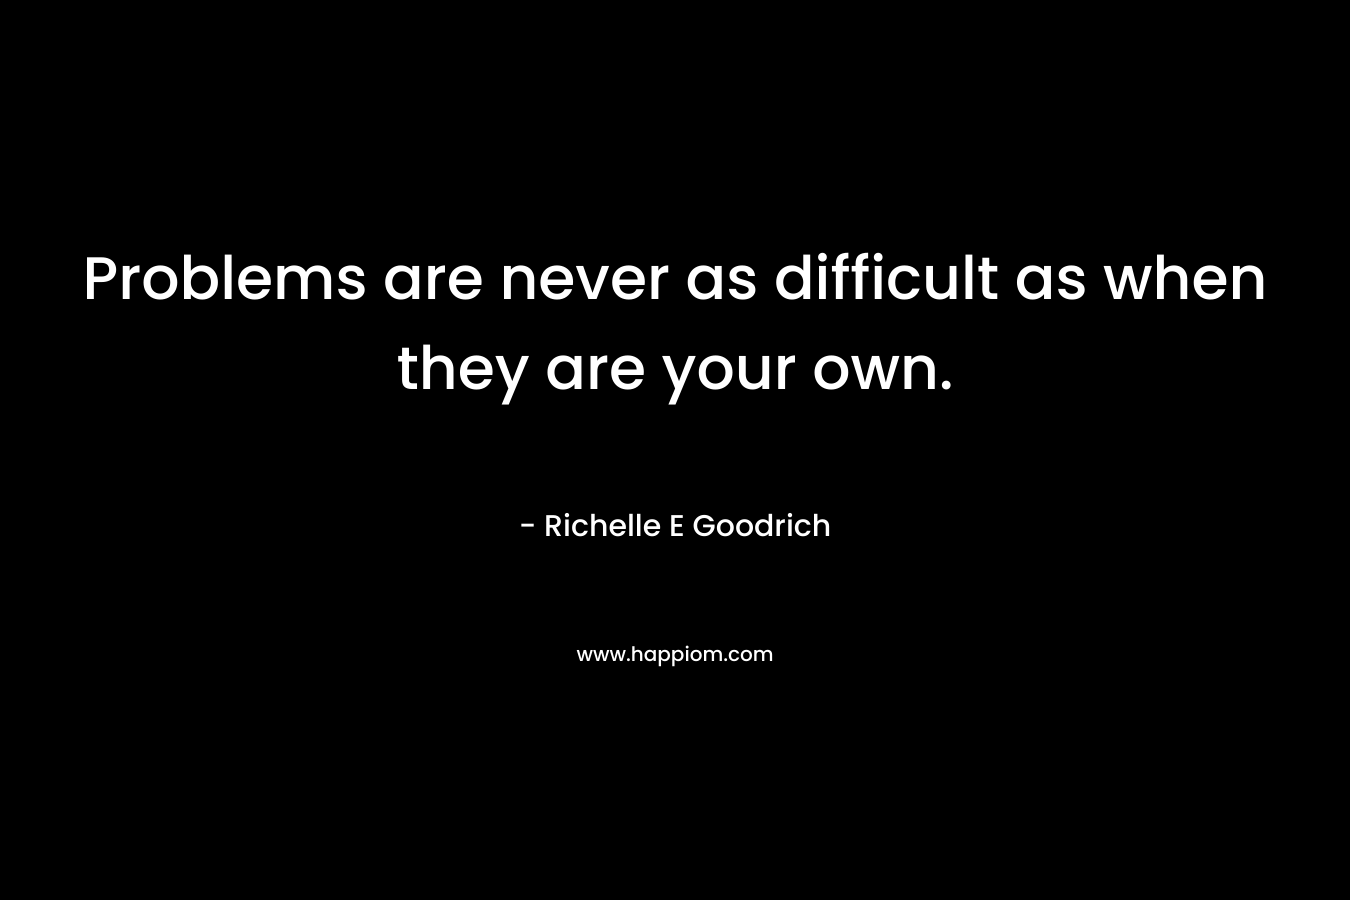 Problems are never as difficult as when they are your own.